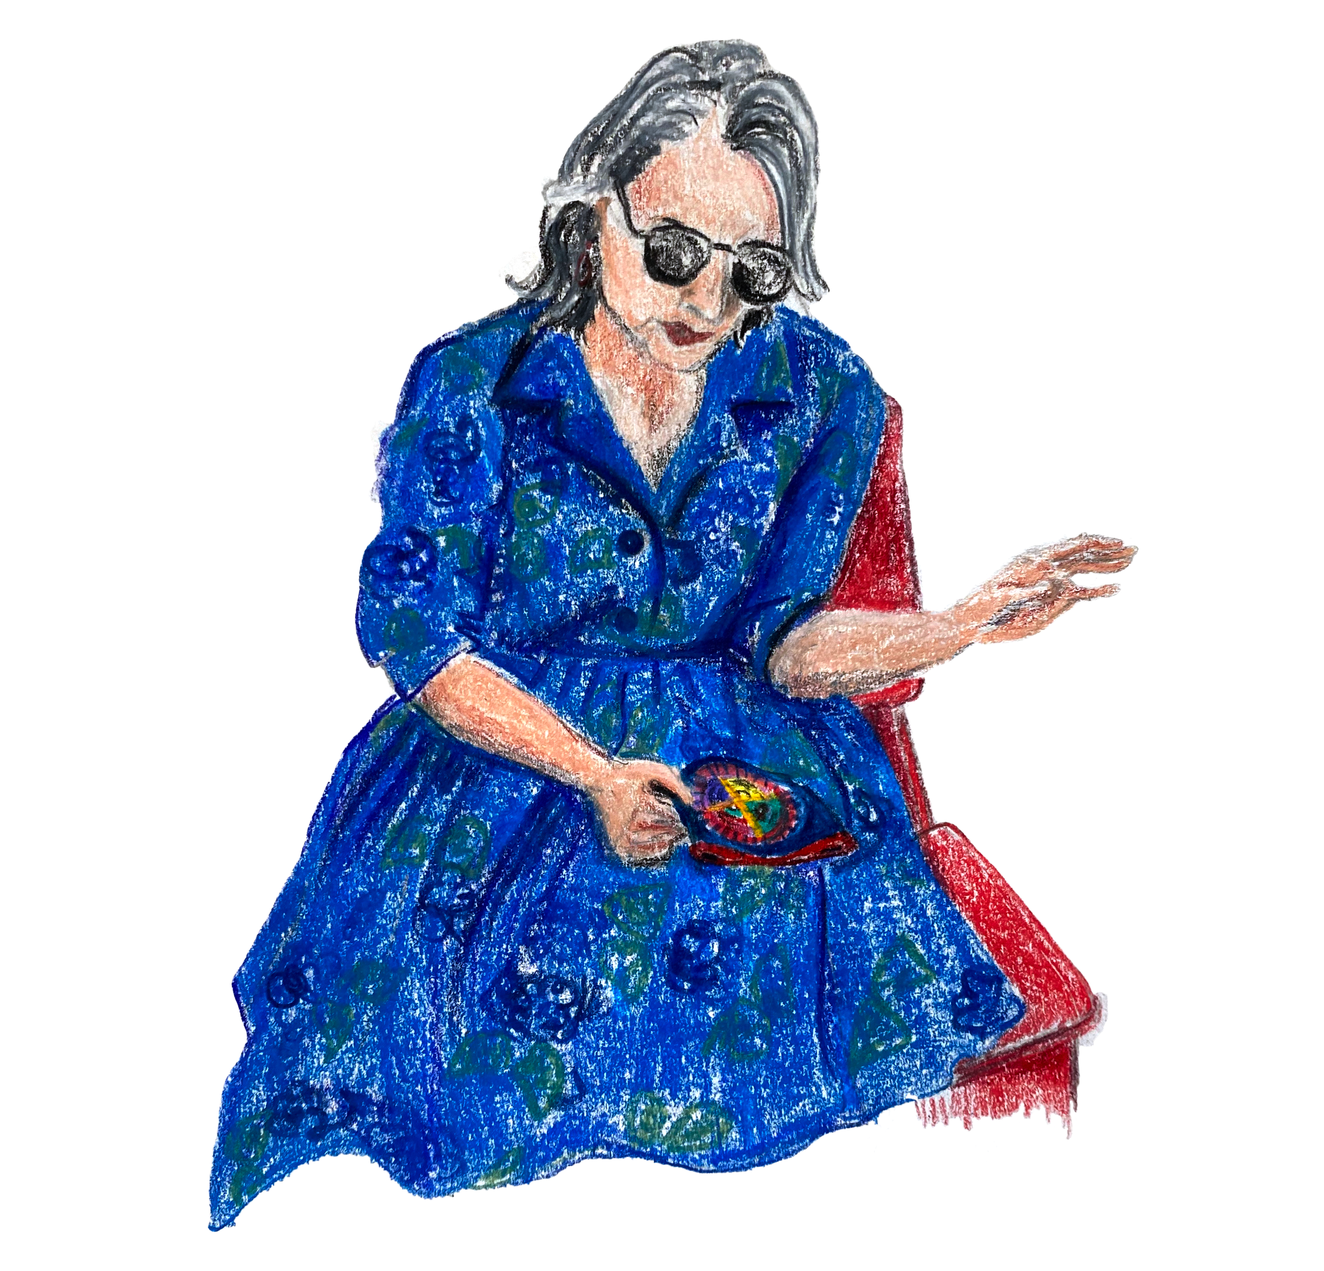 Colored pencil drawing of a white middled aged woman in a bright blue dress and sunglasses. Sh is seated on a red chair and holds a colorfully embroidered purse in her right hand.